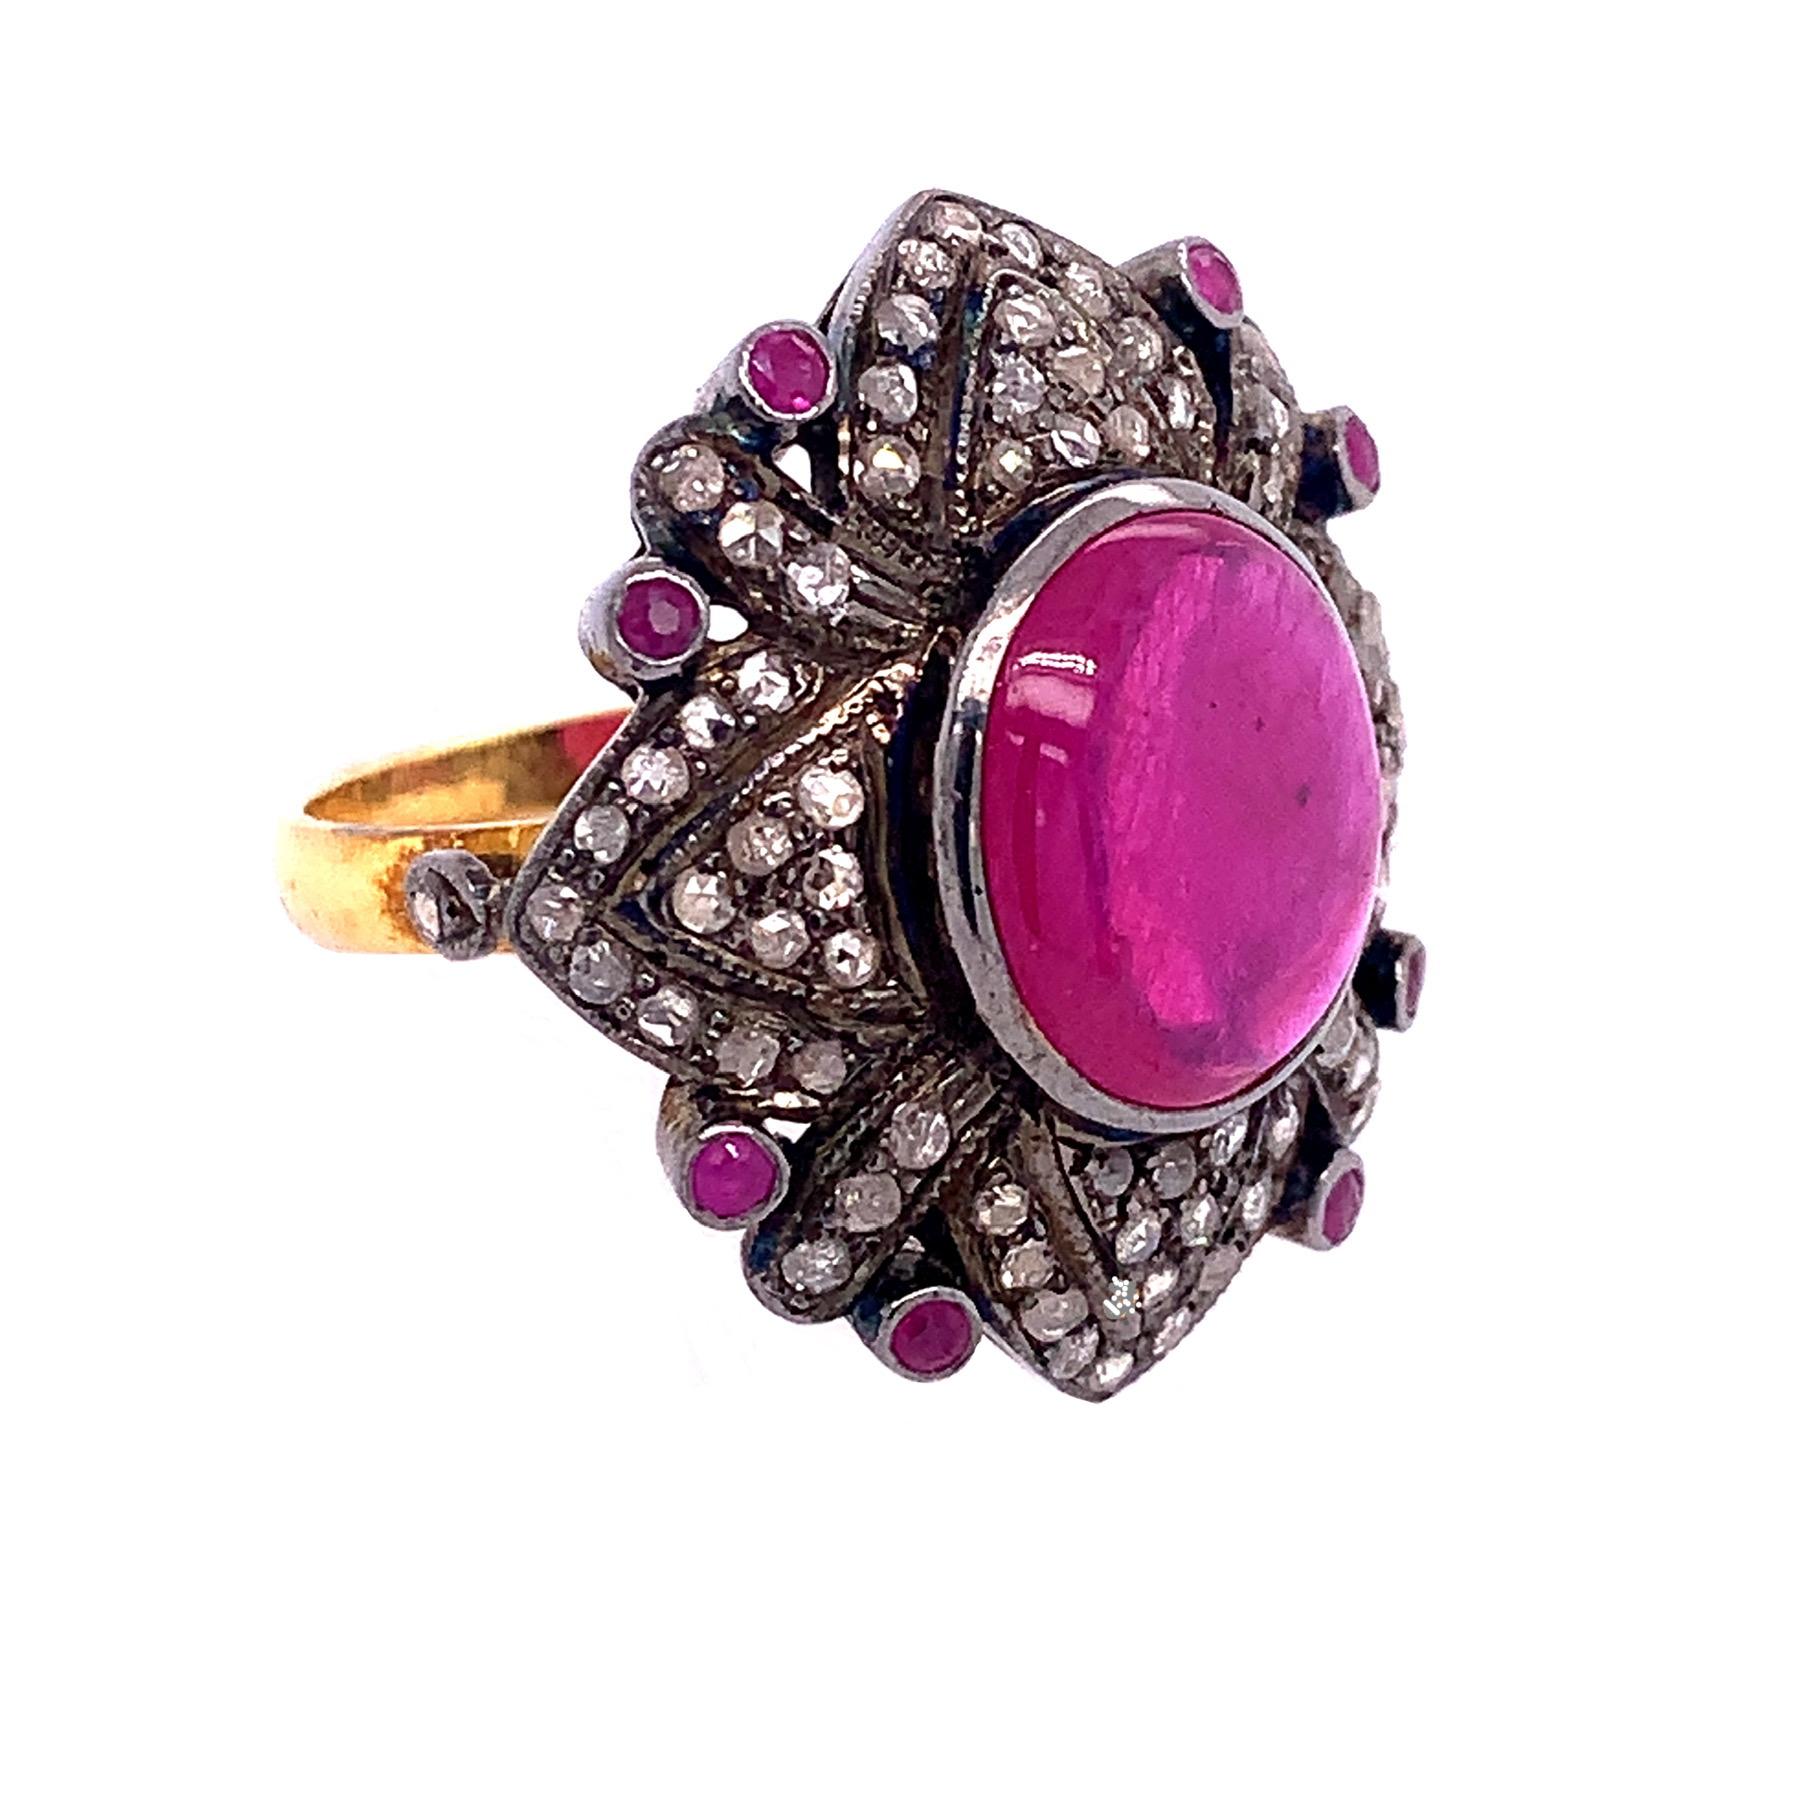 Life in color collection

Bright Passion Cabochon Ruby and diamonds cocktail ring set in sterling silver and yellow gold.

Ruby : 5.76ct total weight.
Diamond : 0.79ct total weight.
US size : 7.75
